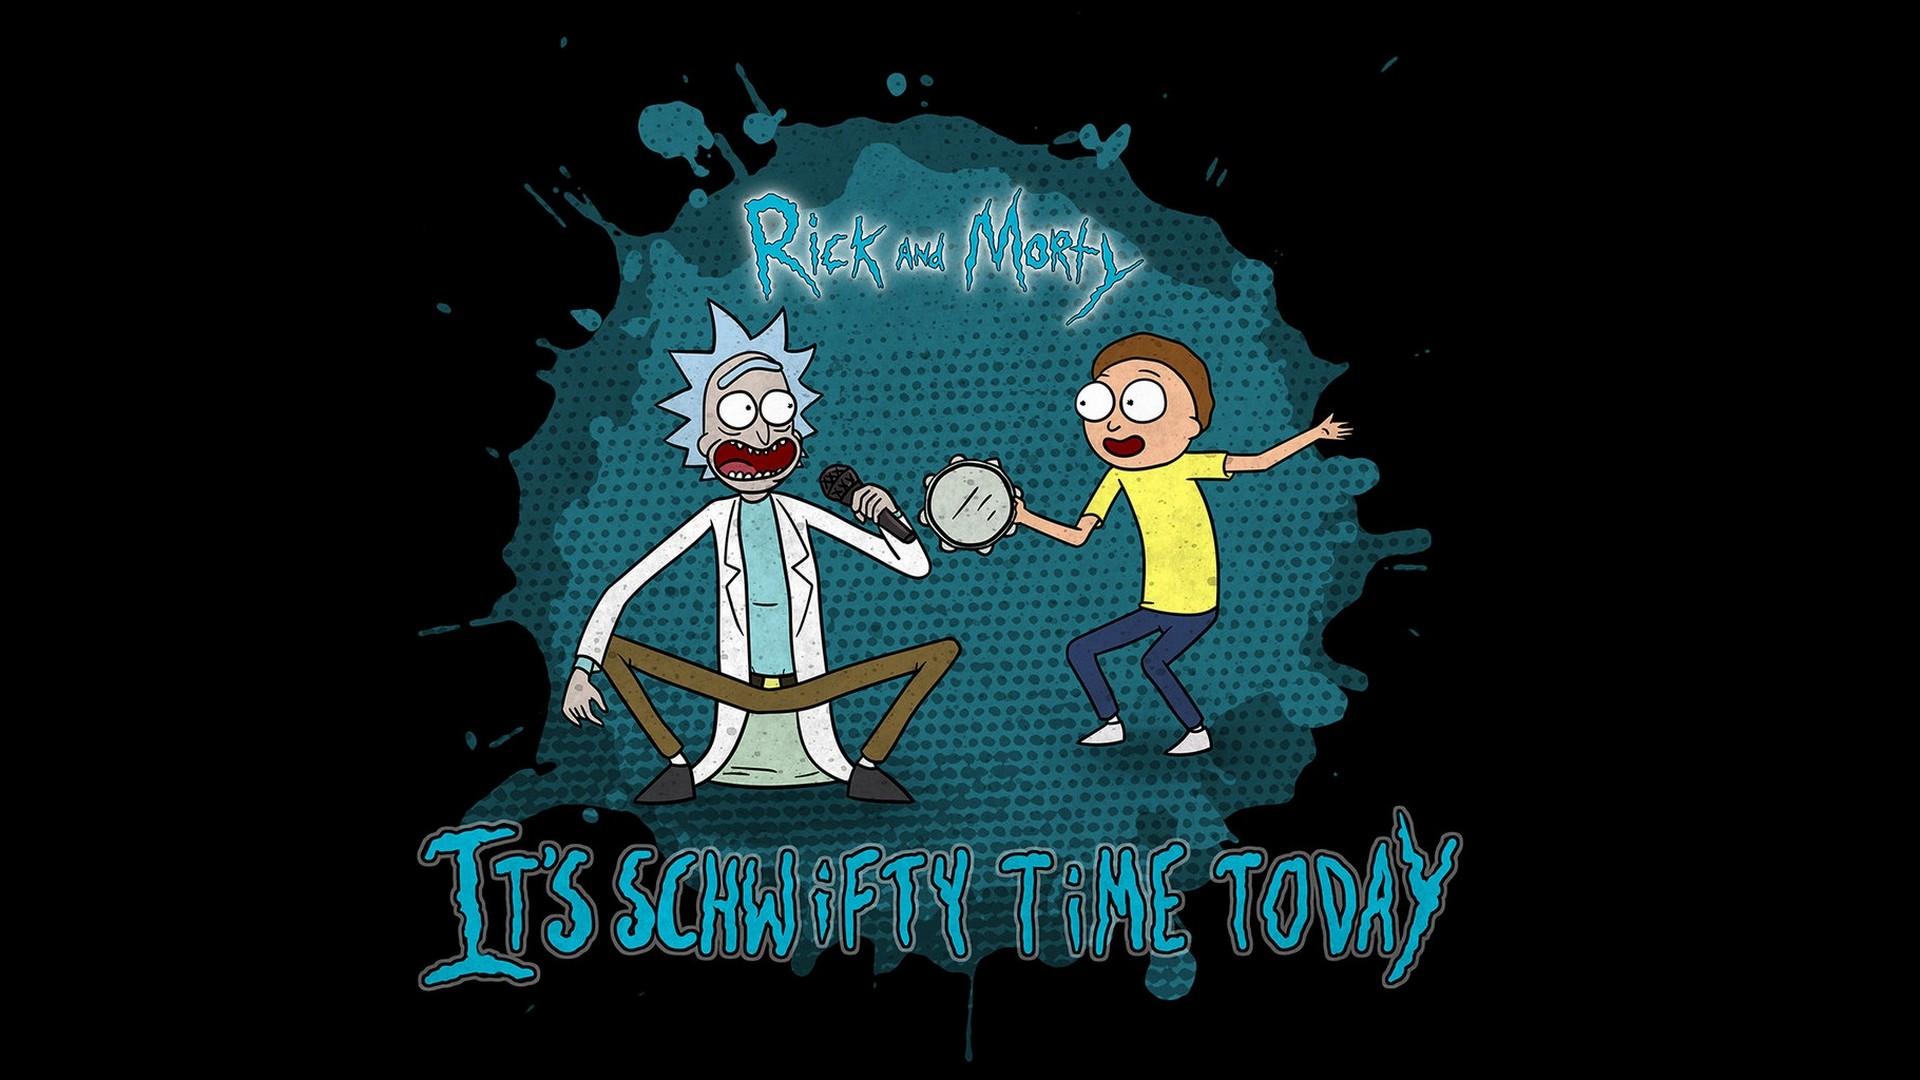 HD Rick and Morty Art Background Cute Wallpaper